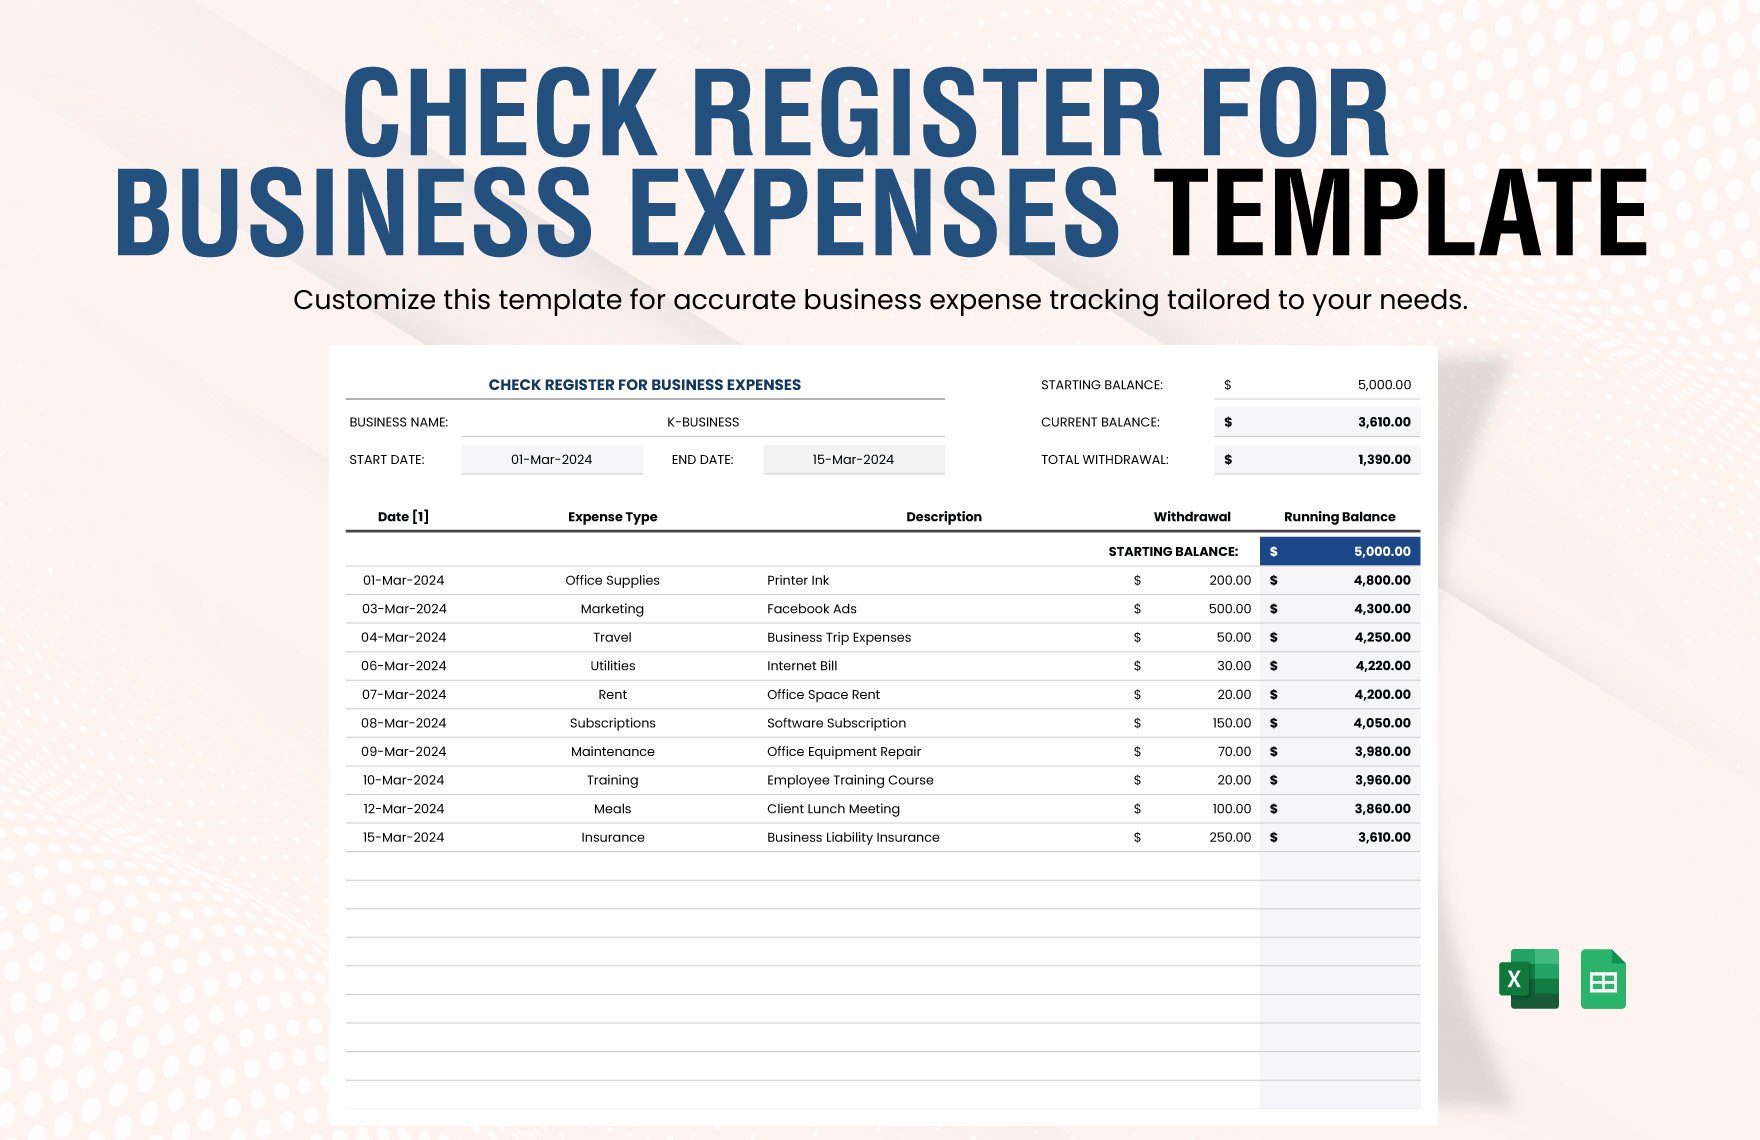 Check Register for Business Expenses Template in Excel, Google Sheets